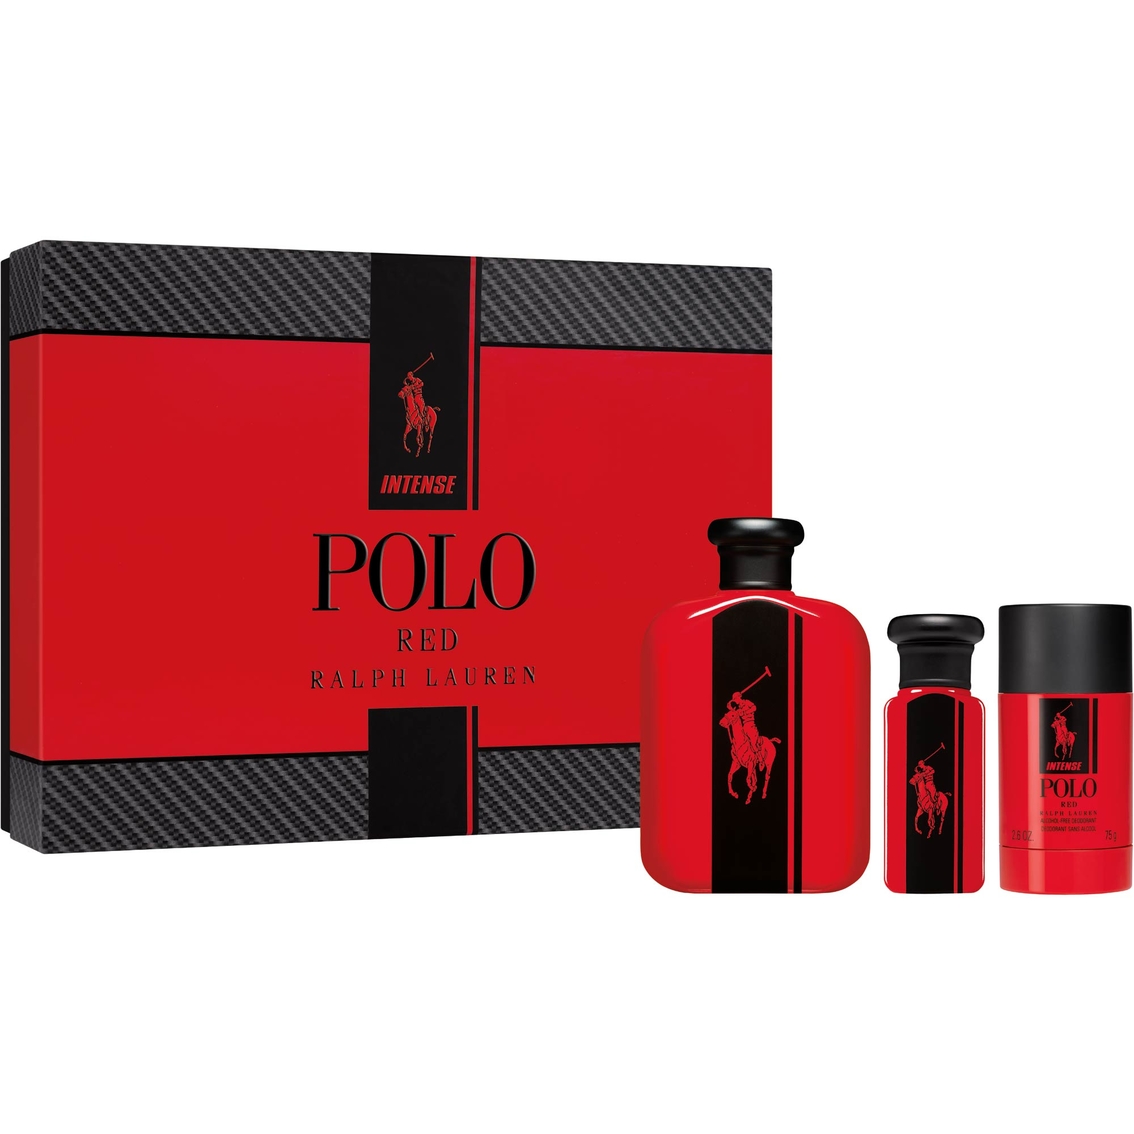 Ralph Lauren Polo Red Intense 3 Pc. Gift Set | Gifts Sets For Him ...